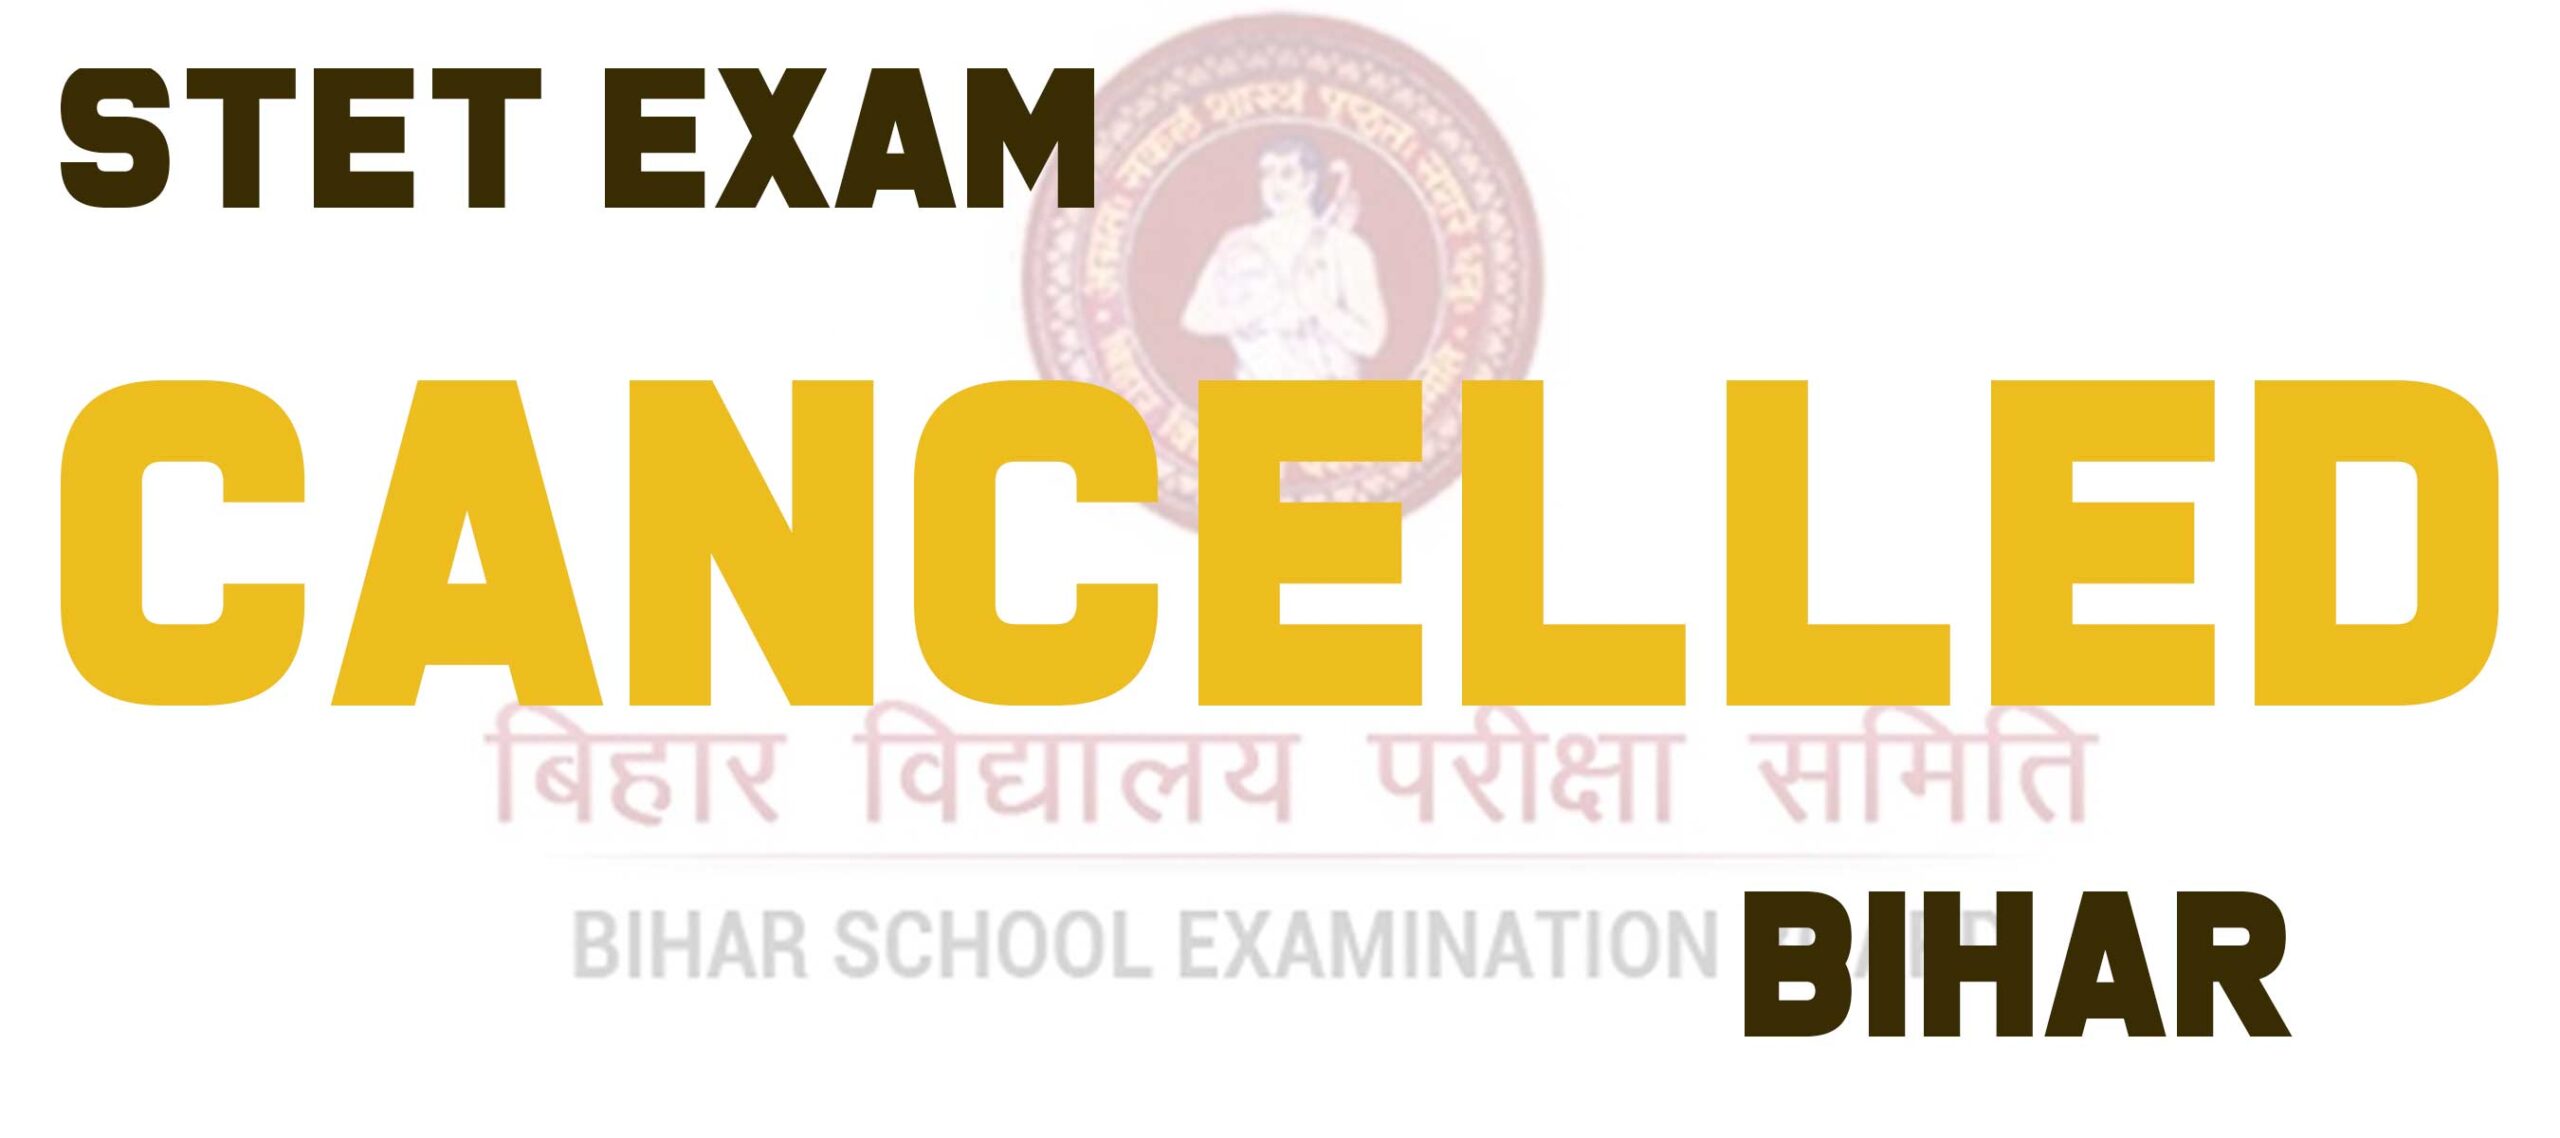 STET Exam 2020 Cancelled due to the irregularities, paper leak allegations, Bihar